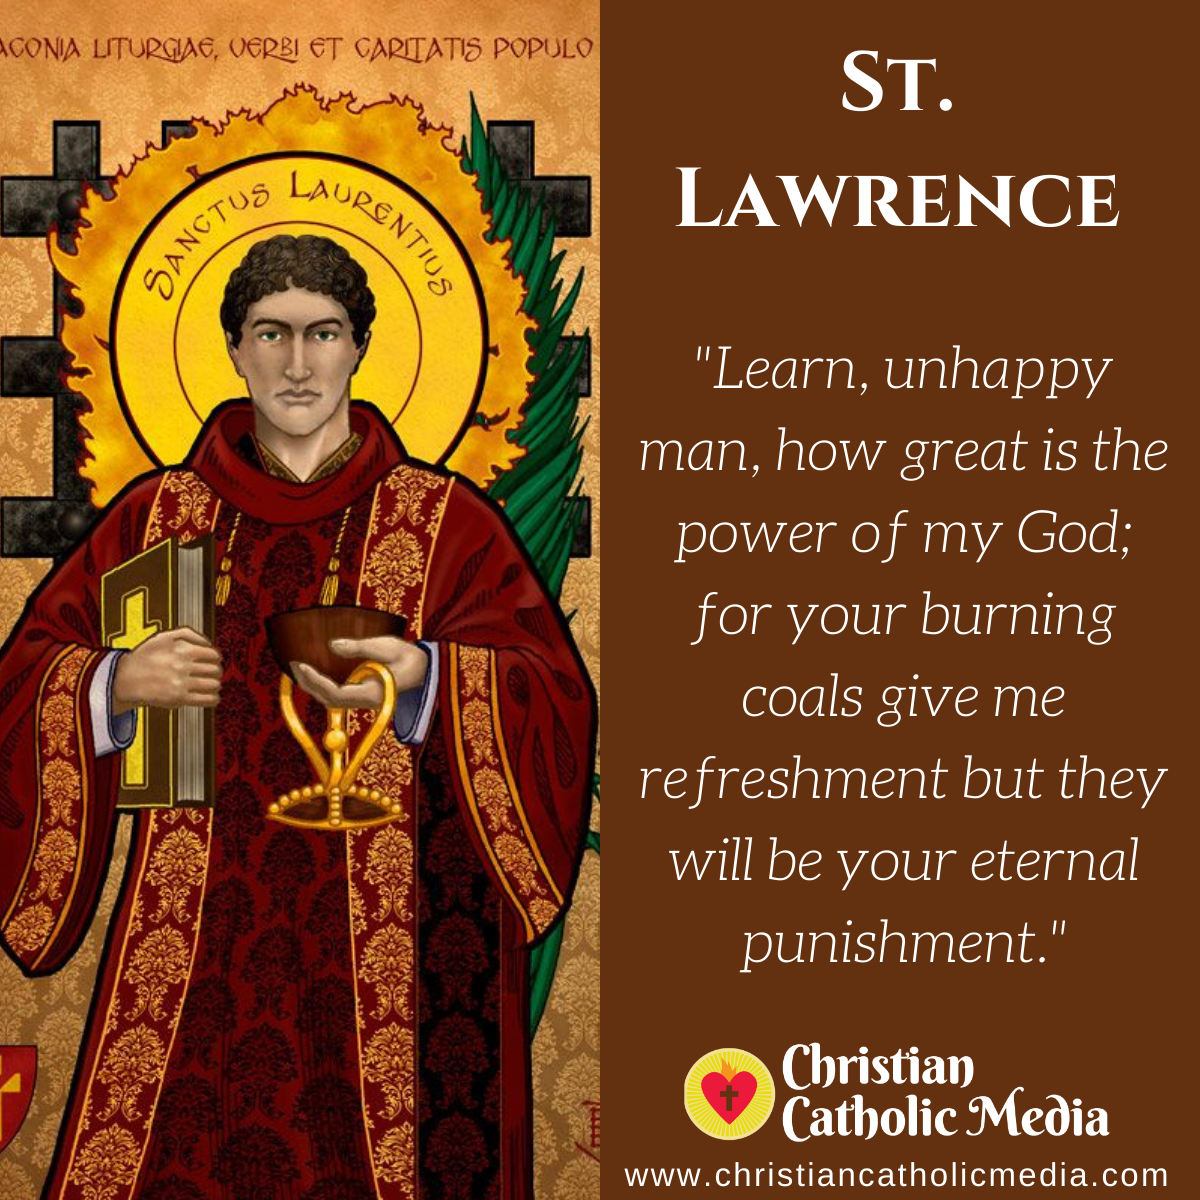 St. Lawrence - Tuesday August 10, 2021